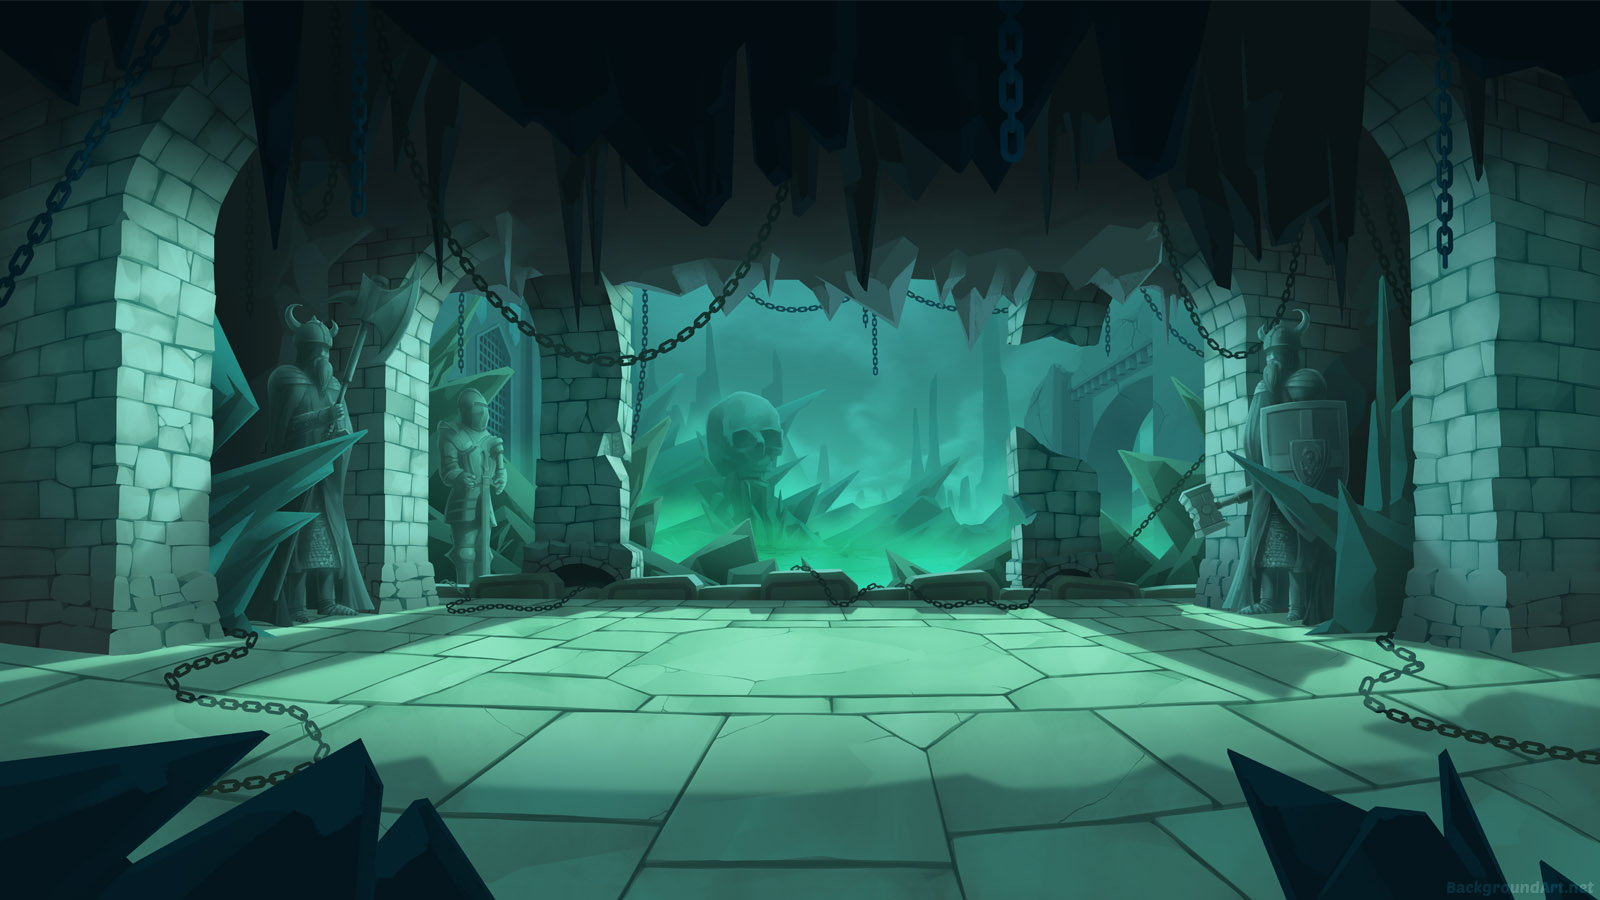  | Background Art for Animation